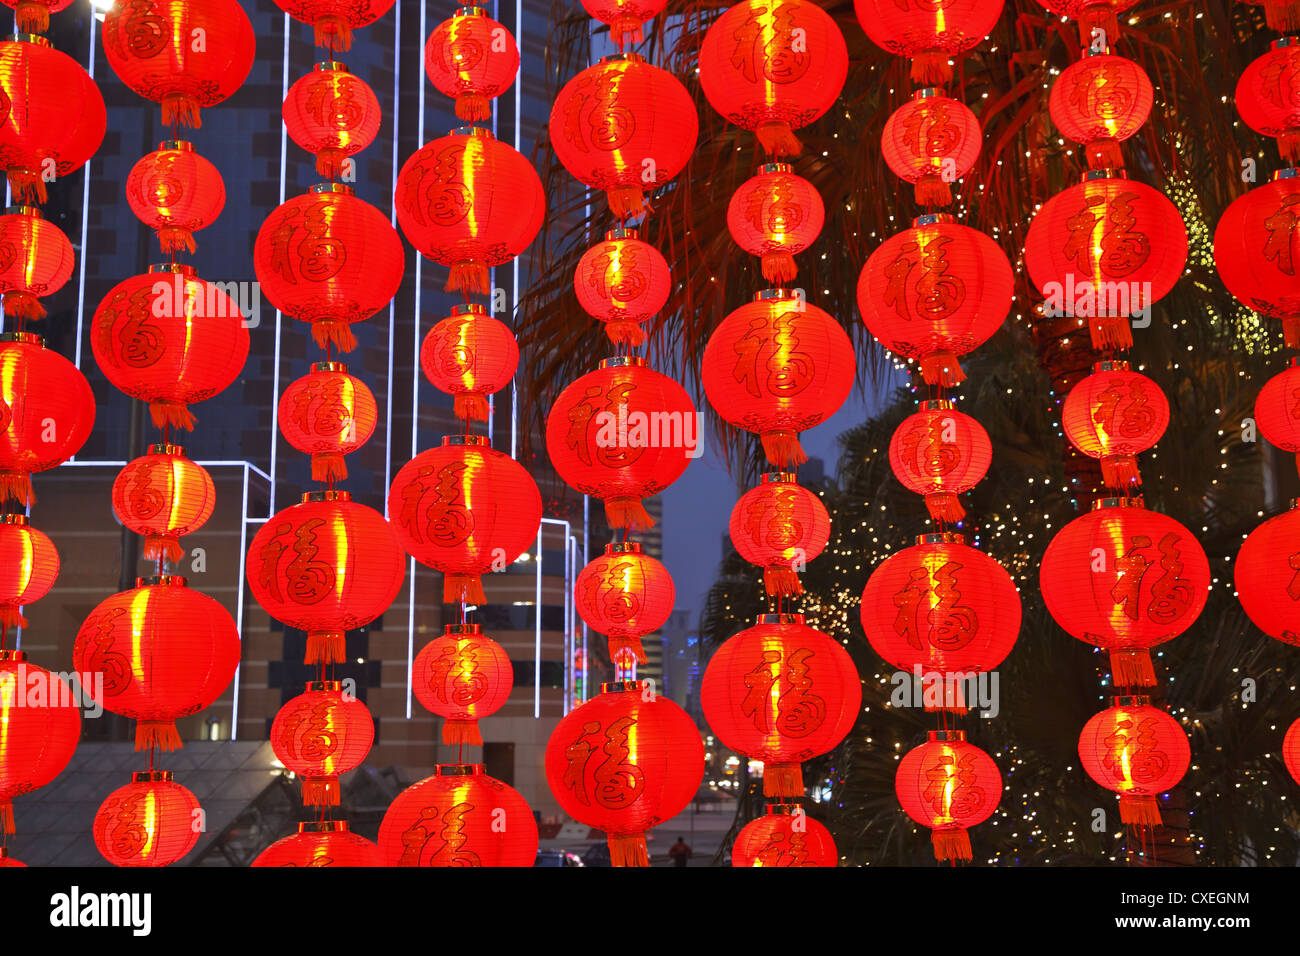 The ornamented decorative red small lamps Stock Photo